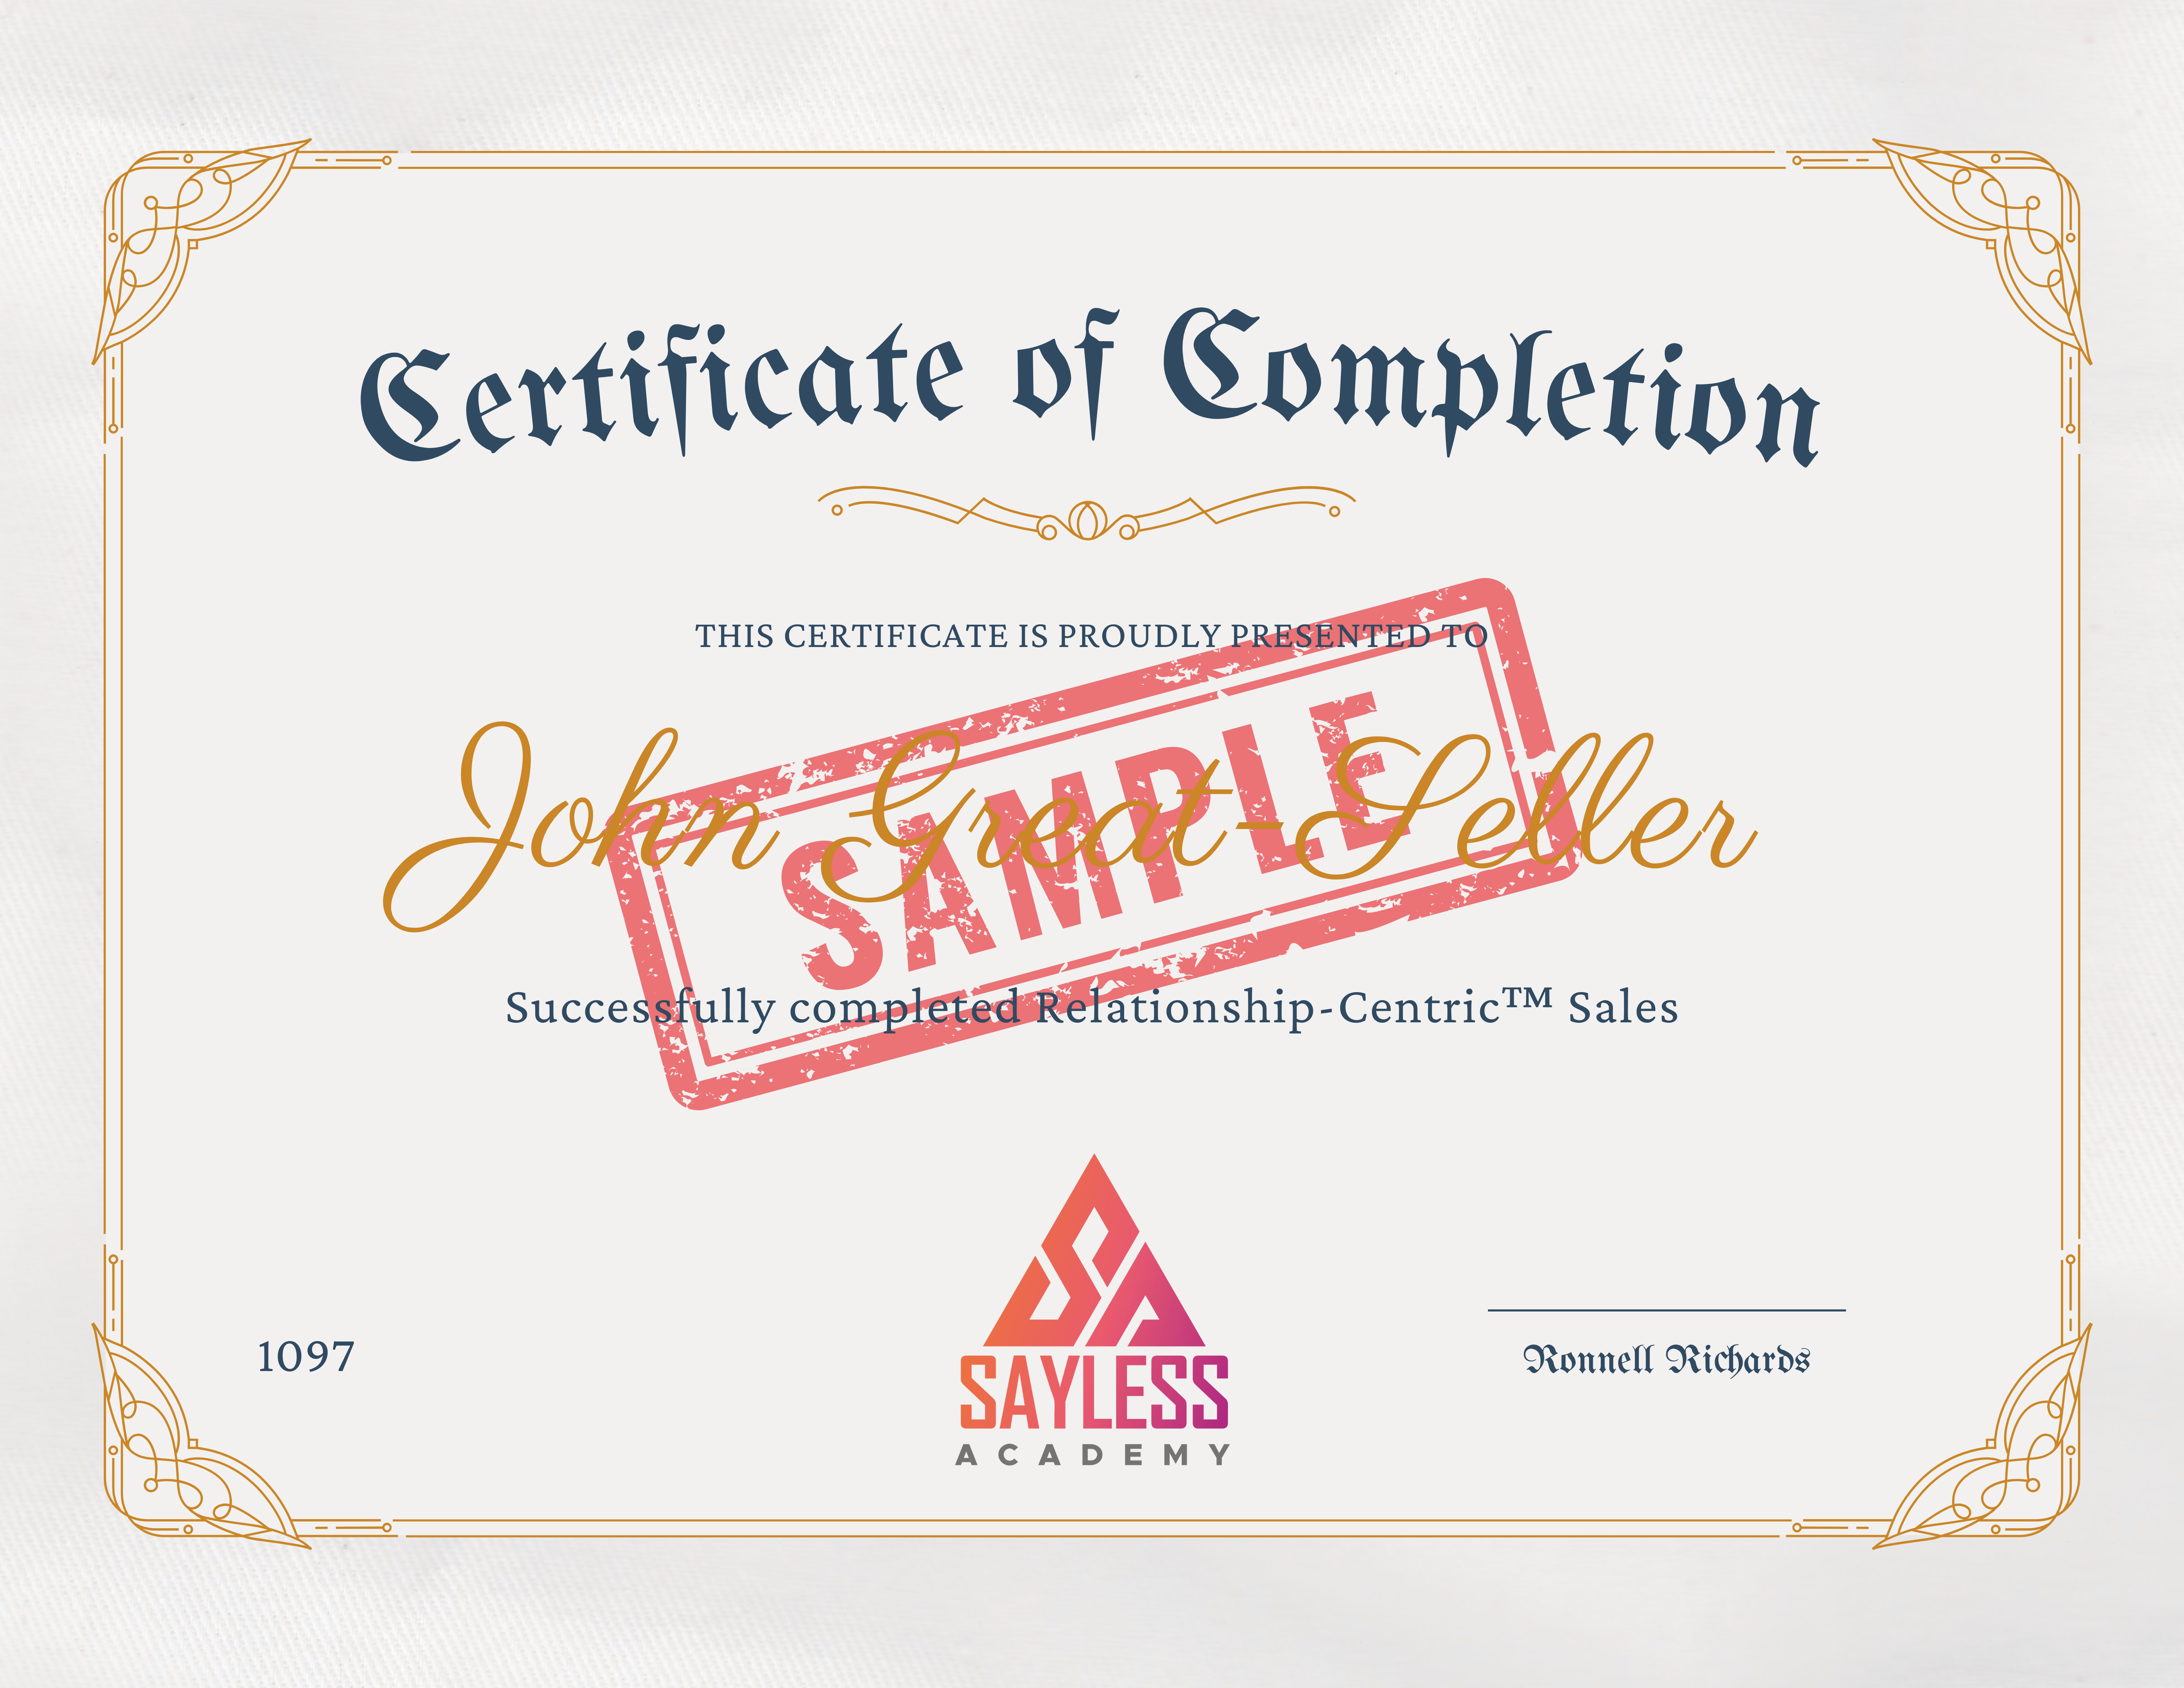 SayLess Academy Online Sales Course